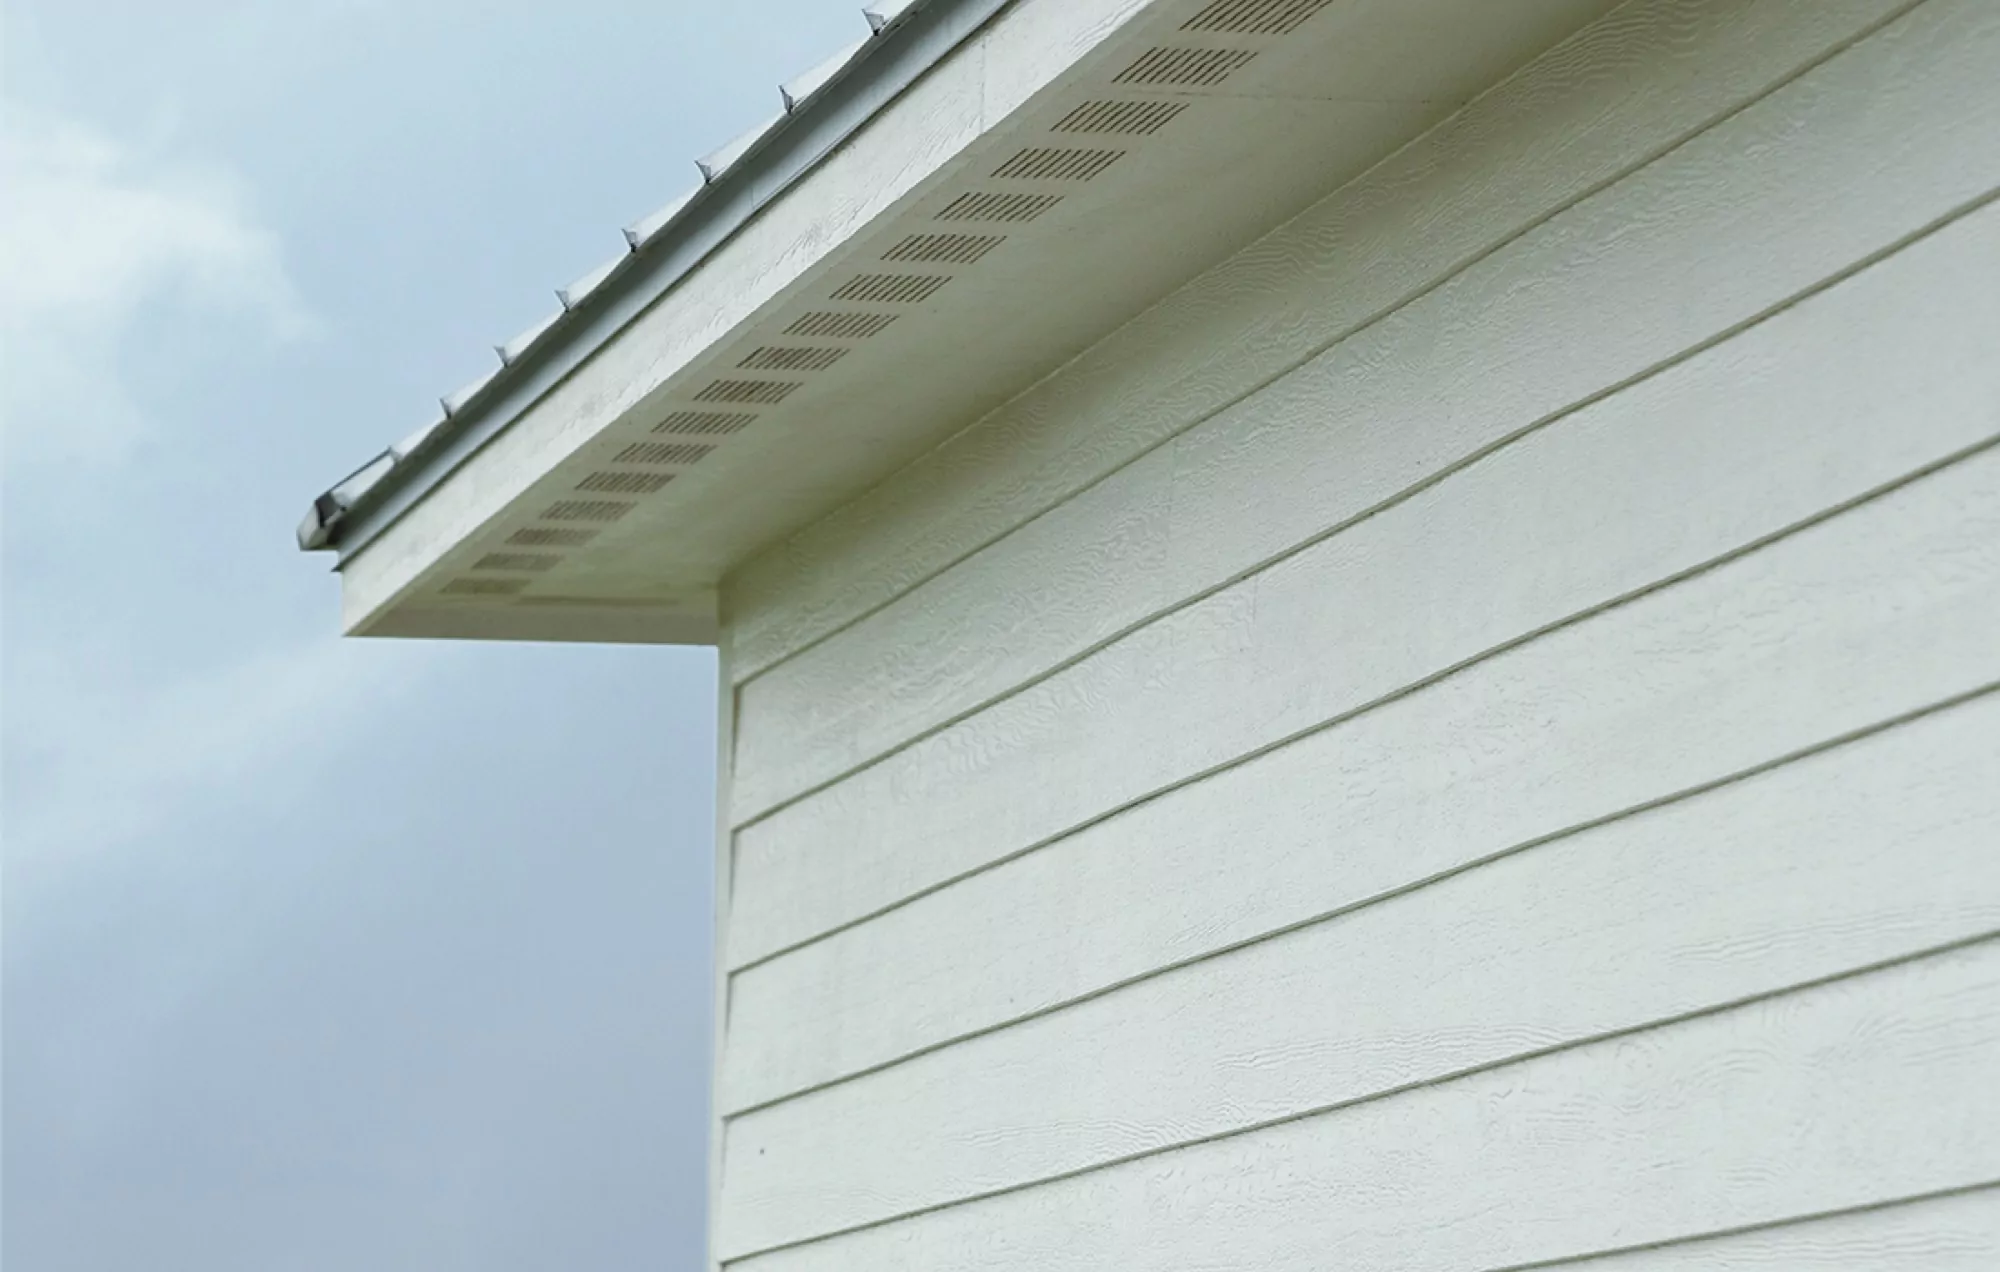 Gutters along a white home's roof